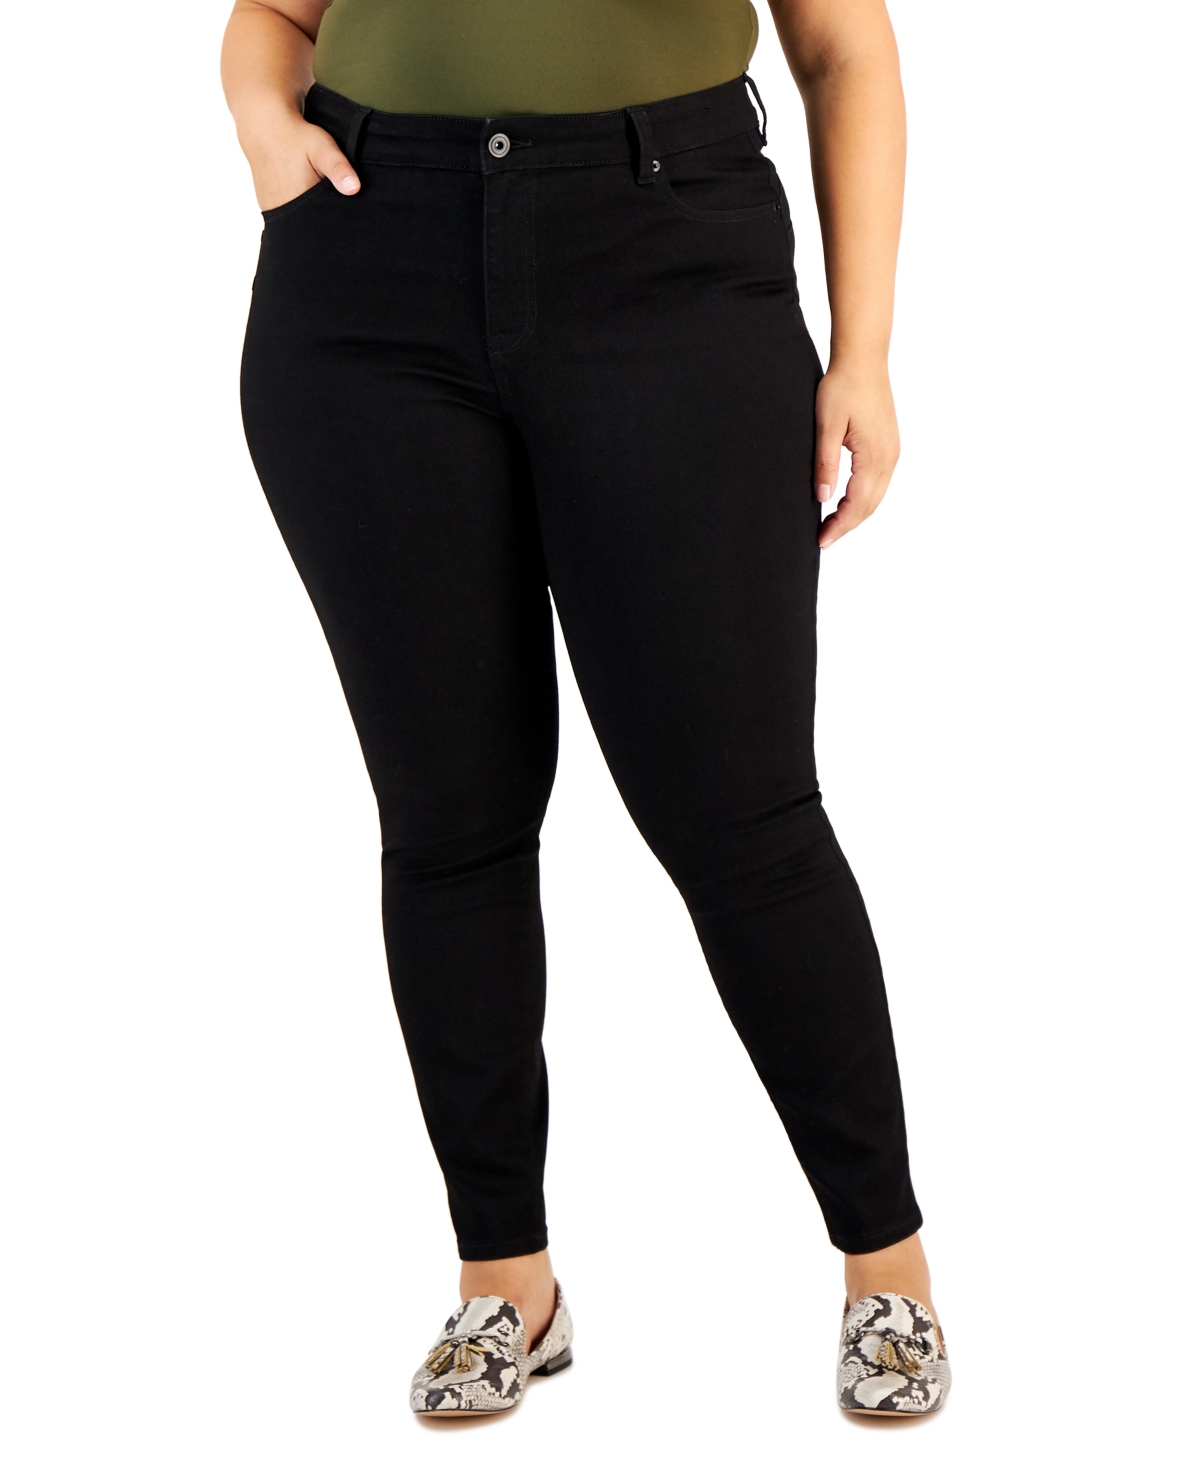 Celebrity Pink Trendy Plus Size Sculpted Skinny Jeans